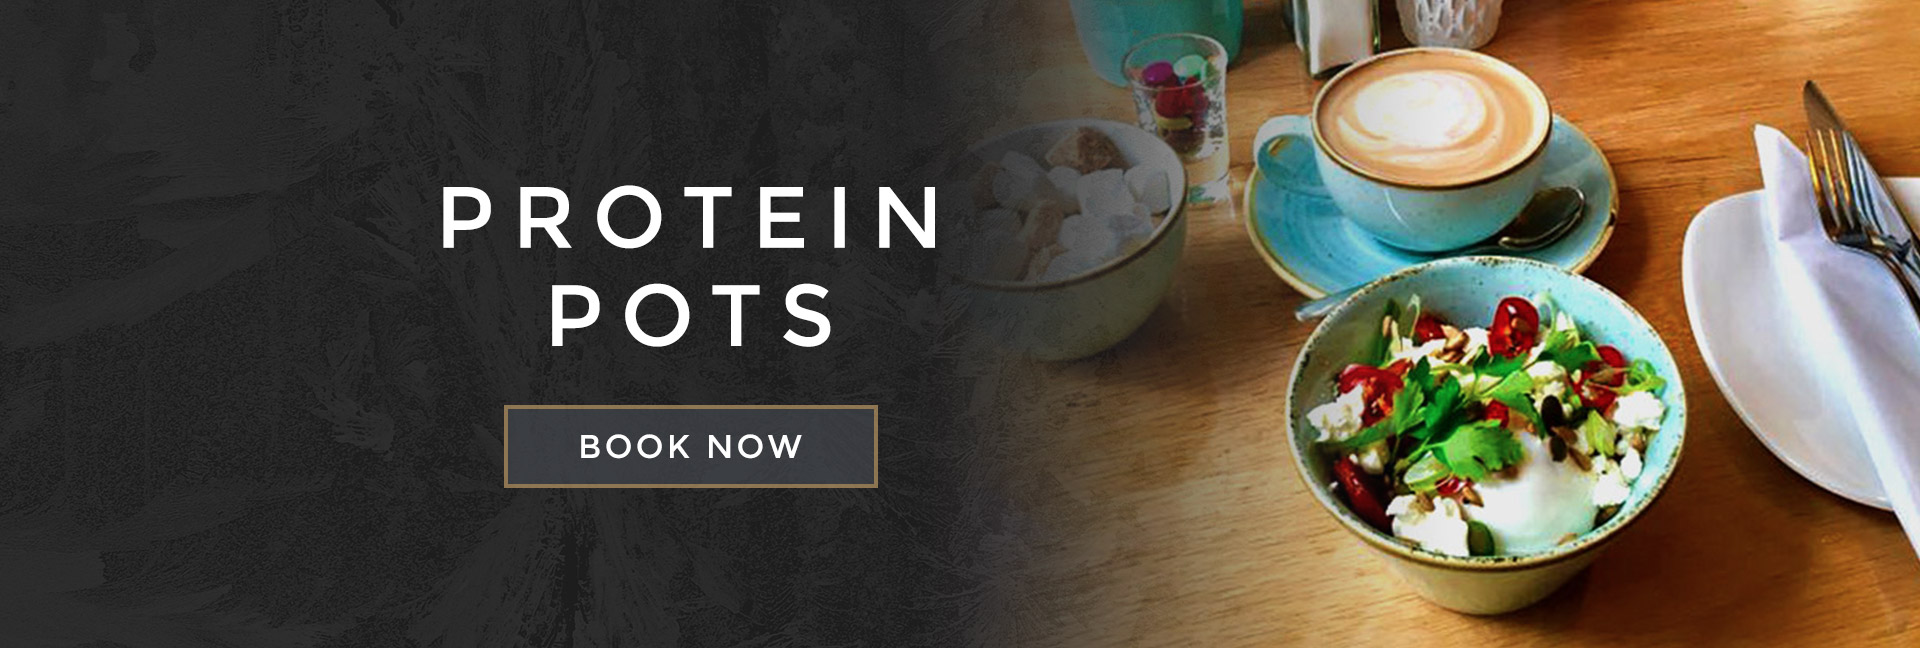 Protein pots at All Bar One Newcastle - Book your table